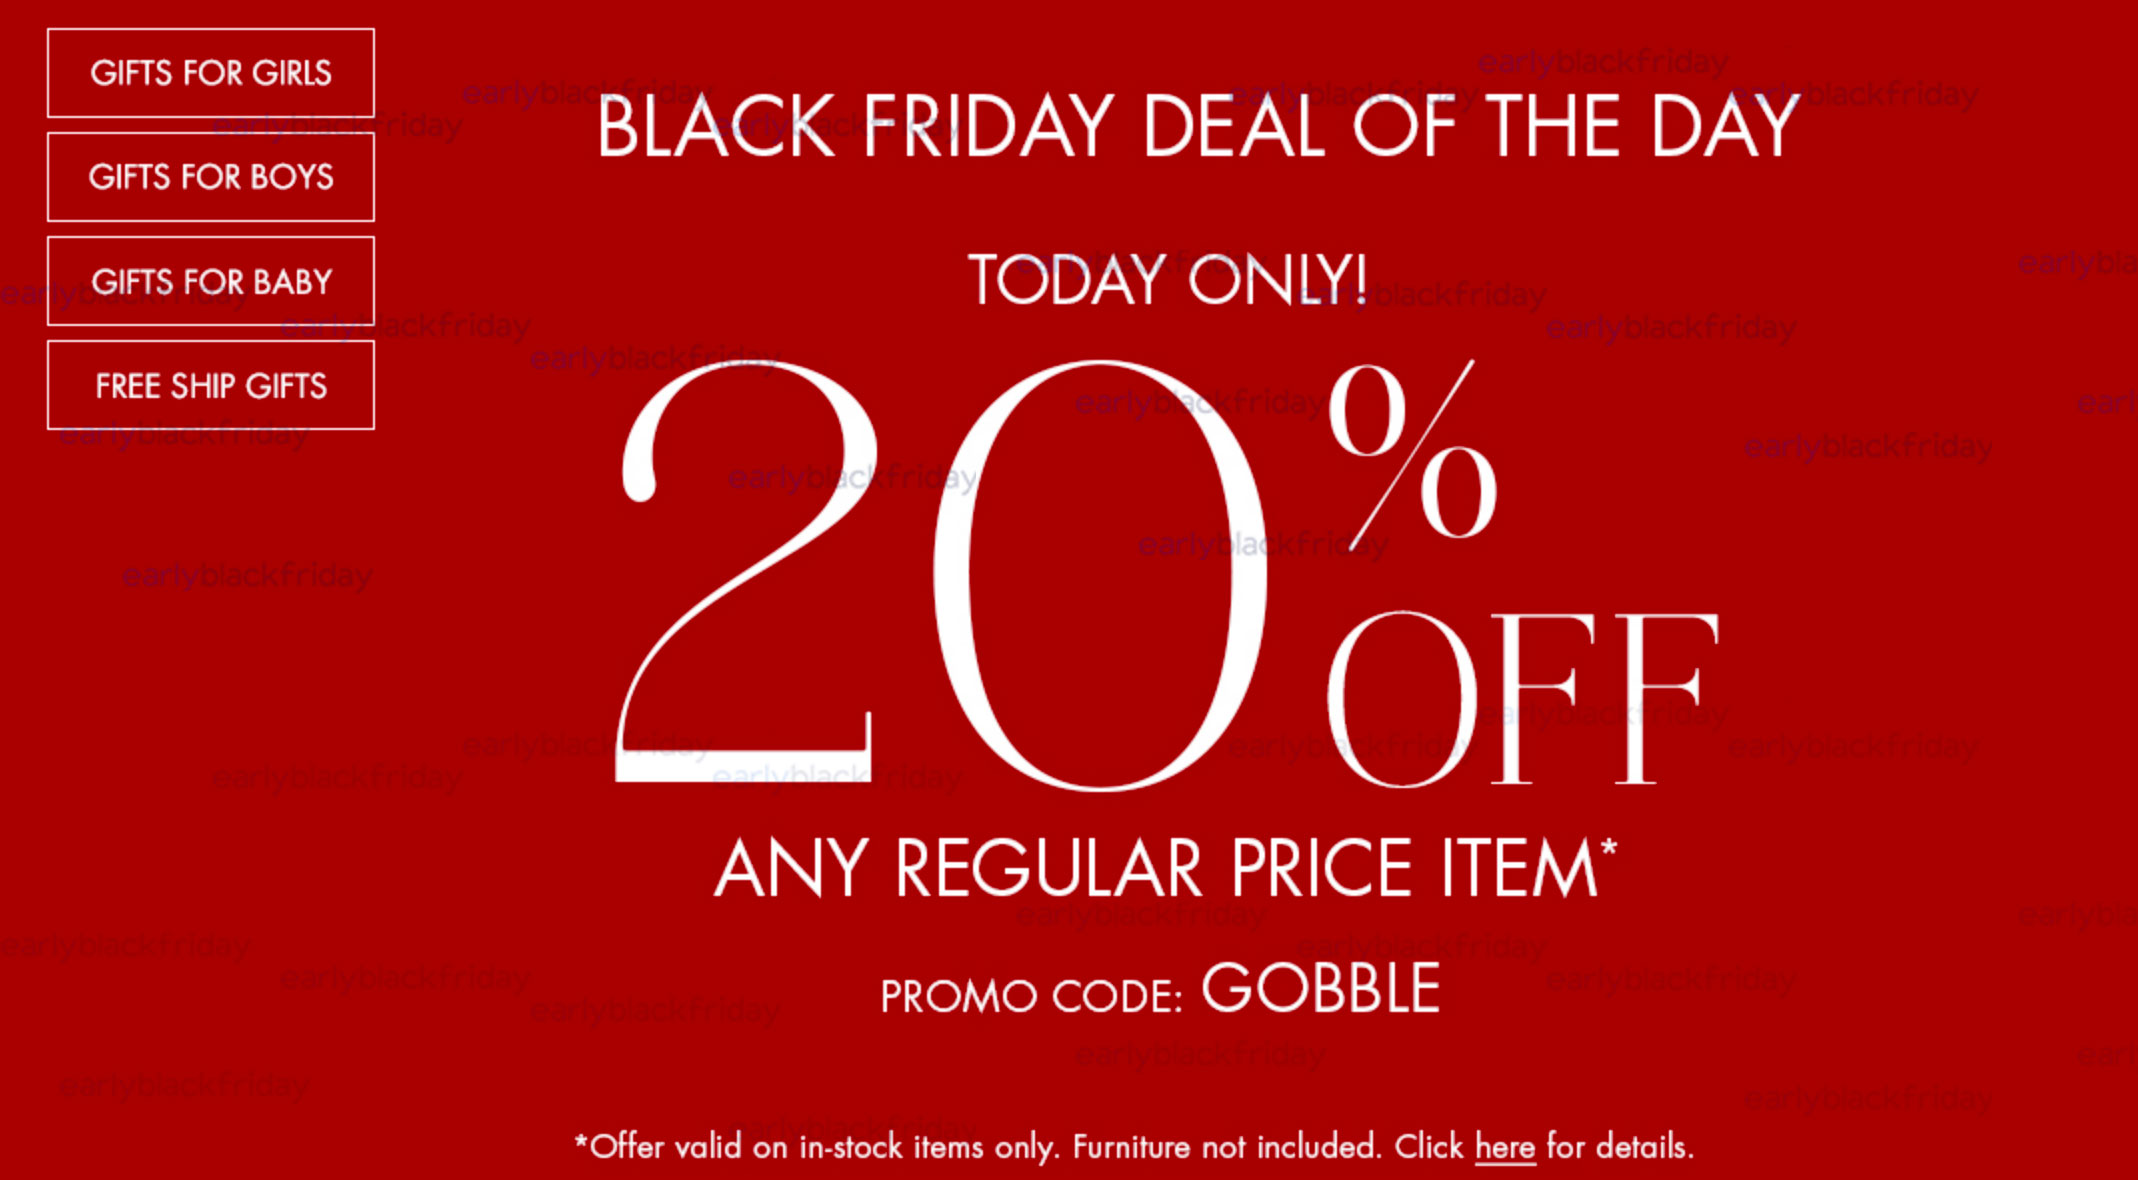 Pottery Barn Kids Black Friday 2021 Ad and Deals - Does Ross Have Any Black Friday Deals